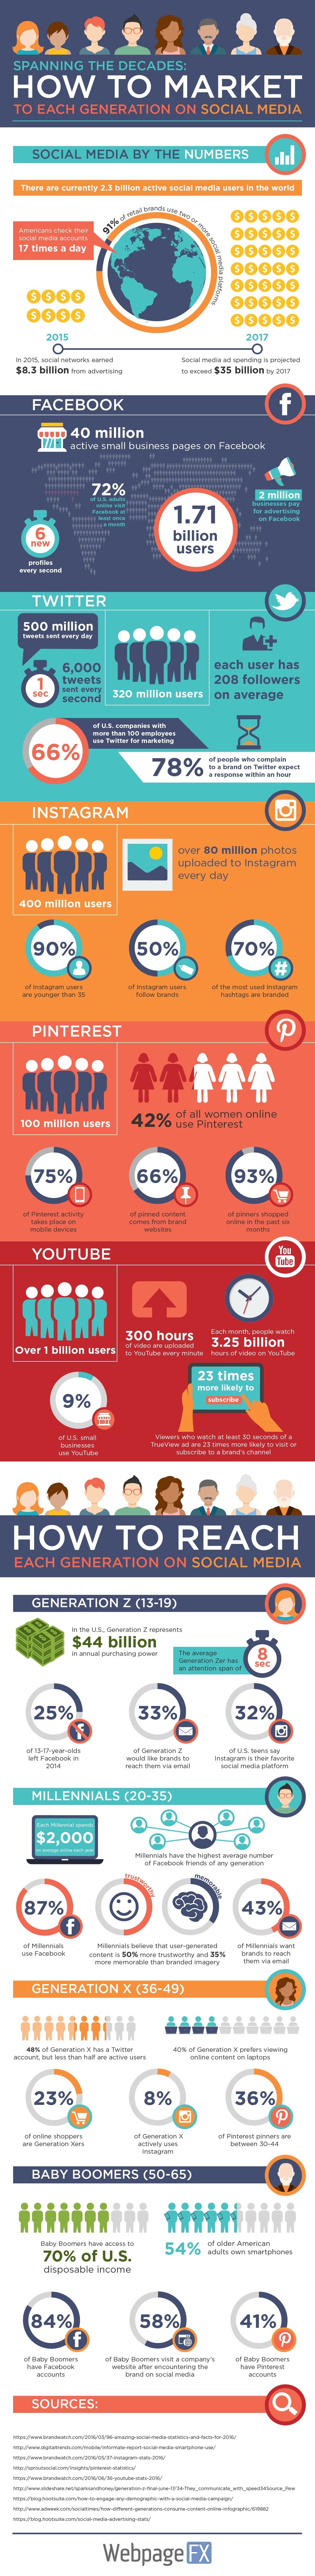 who owns social media infographic